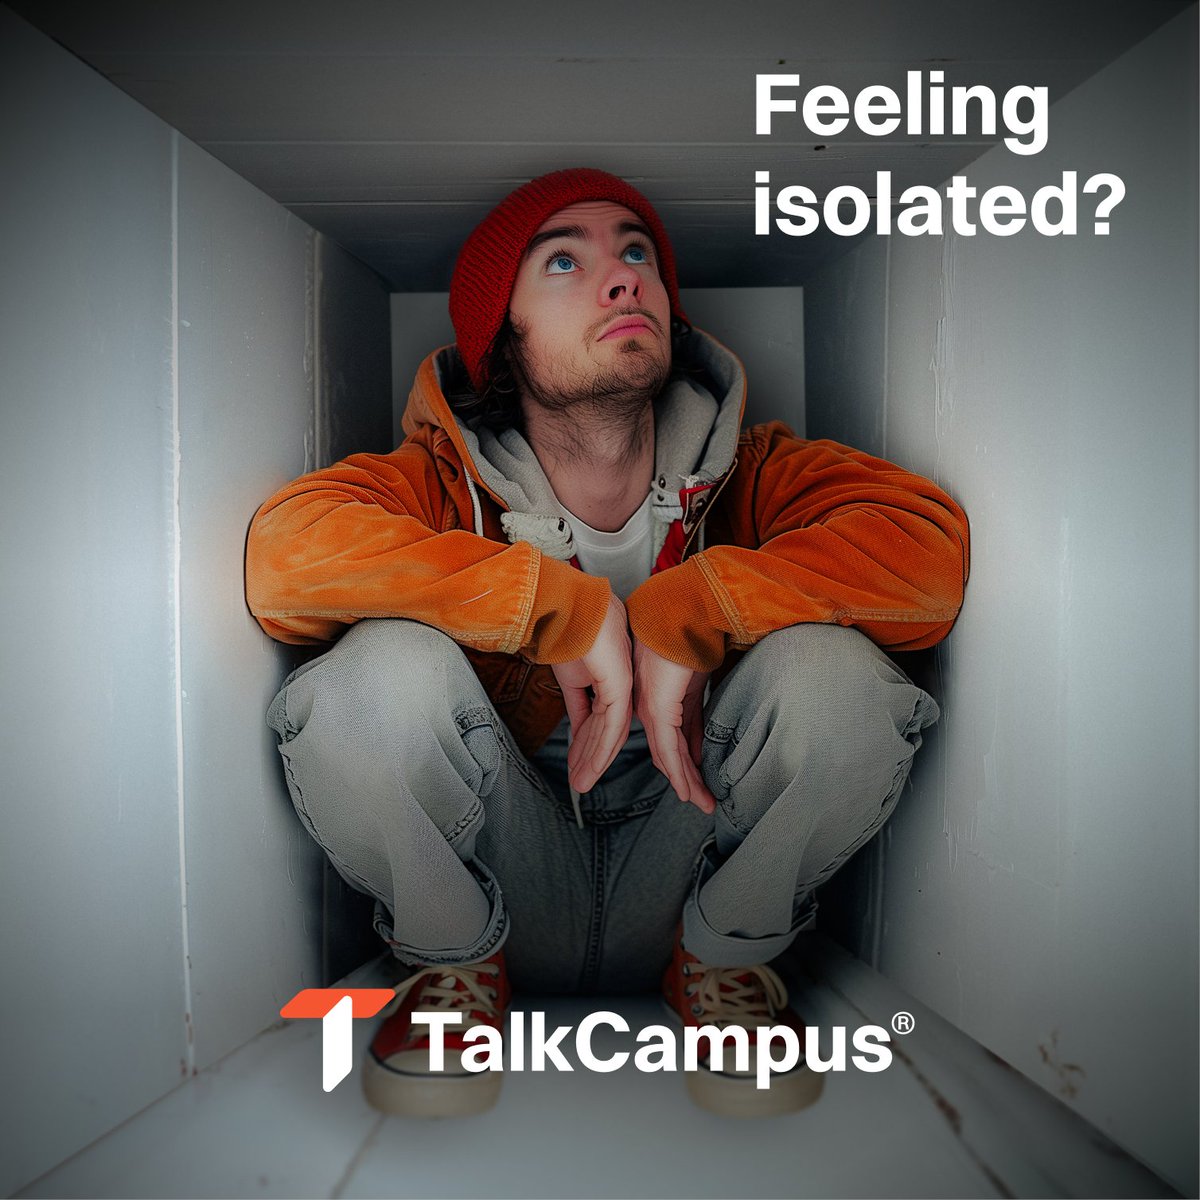 Overwhelmed and panicked? Share your worries on TalkCampus, an online community of students where you can speak openly and honestly. Anonymous and 24/7. Sign up for free with your student email at eicc.edu/TalkCampus @talkcampusapp 📲 #THECommunitysCollege #MentalHealth